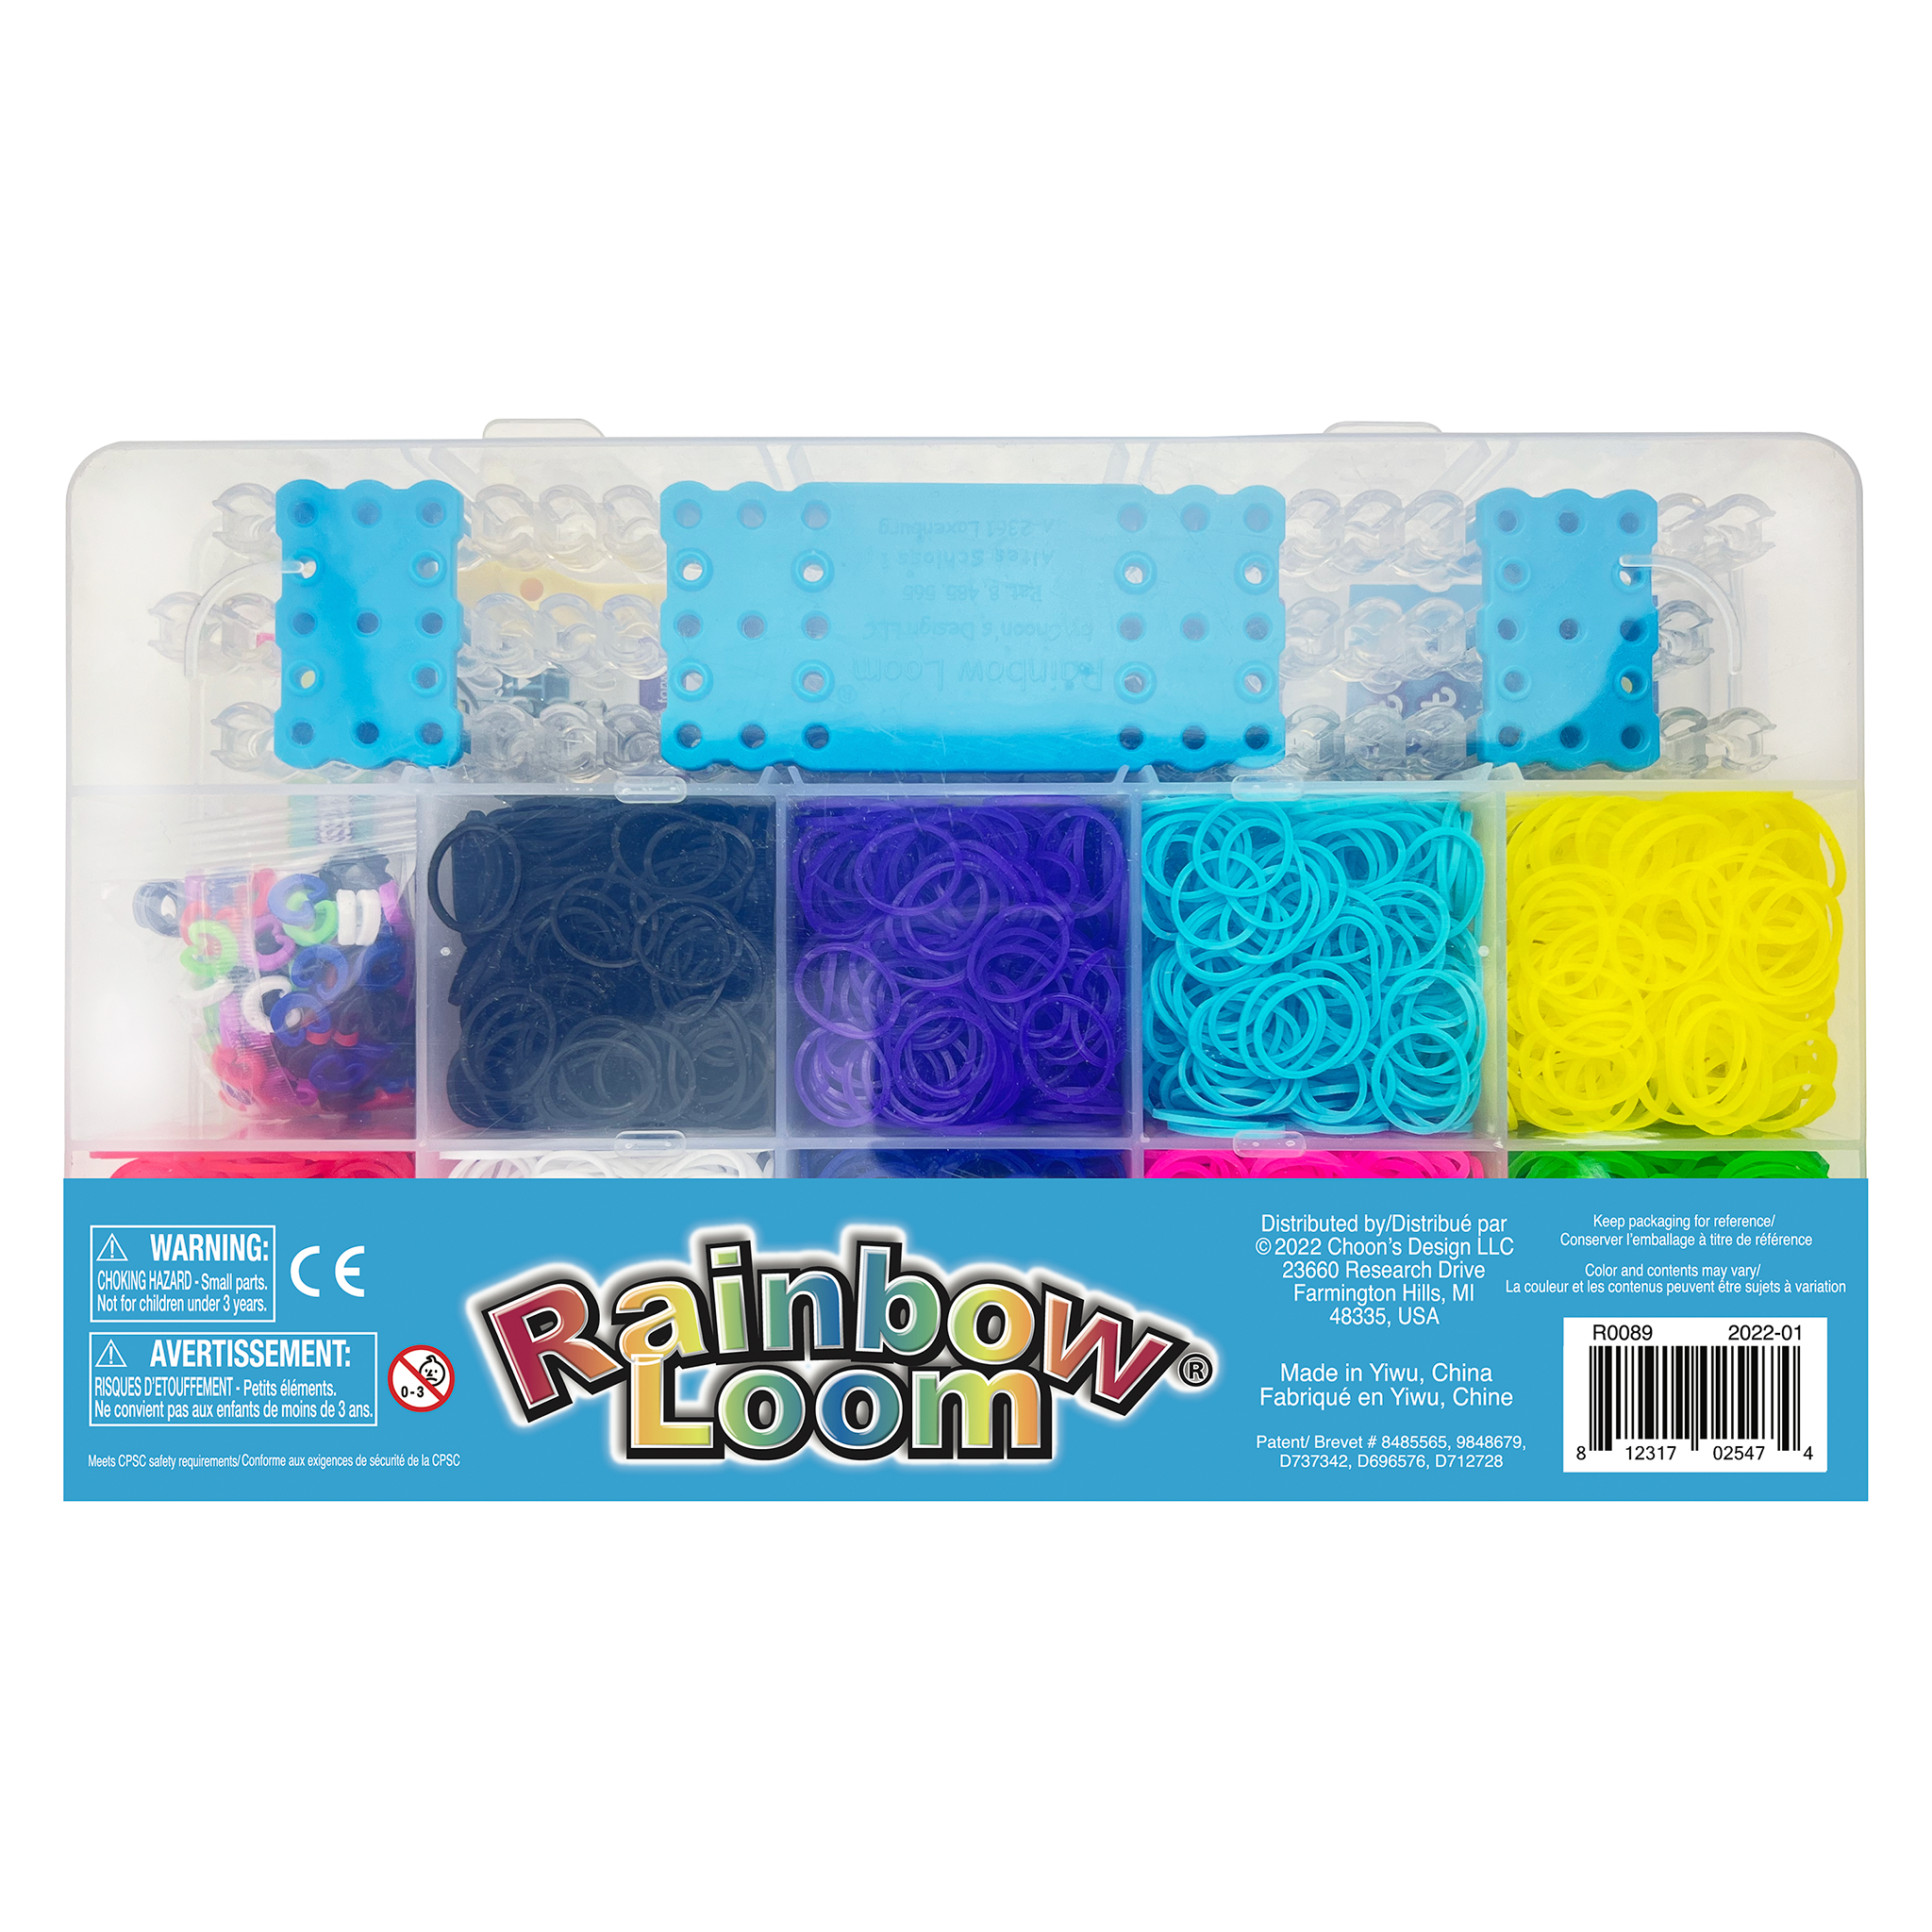  Rainbow Loom® Duo Combo with Jewel Rubber Bands Collection,  Features 2 connectable to Make Longer and Wider Creations, an Organizer  Case, Great Activity up to 4 People 7+ : Toys & Games